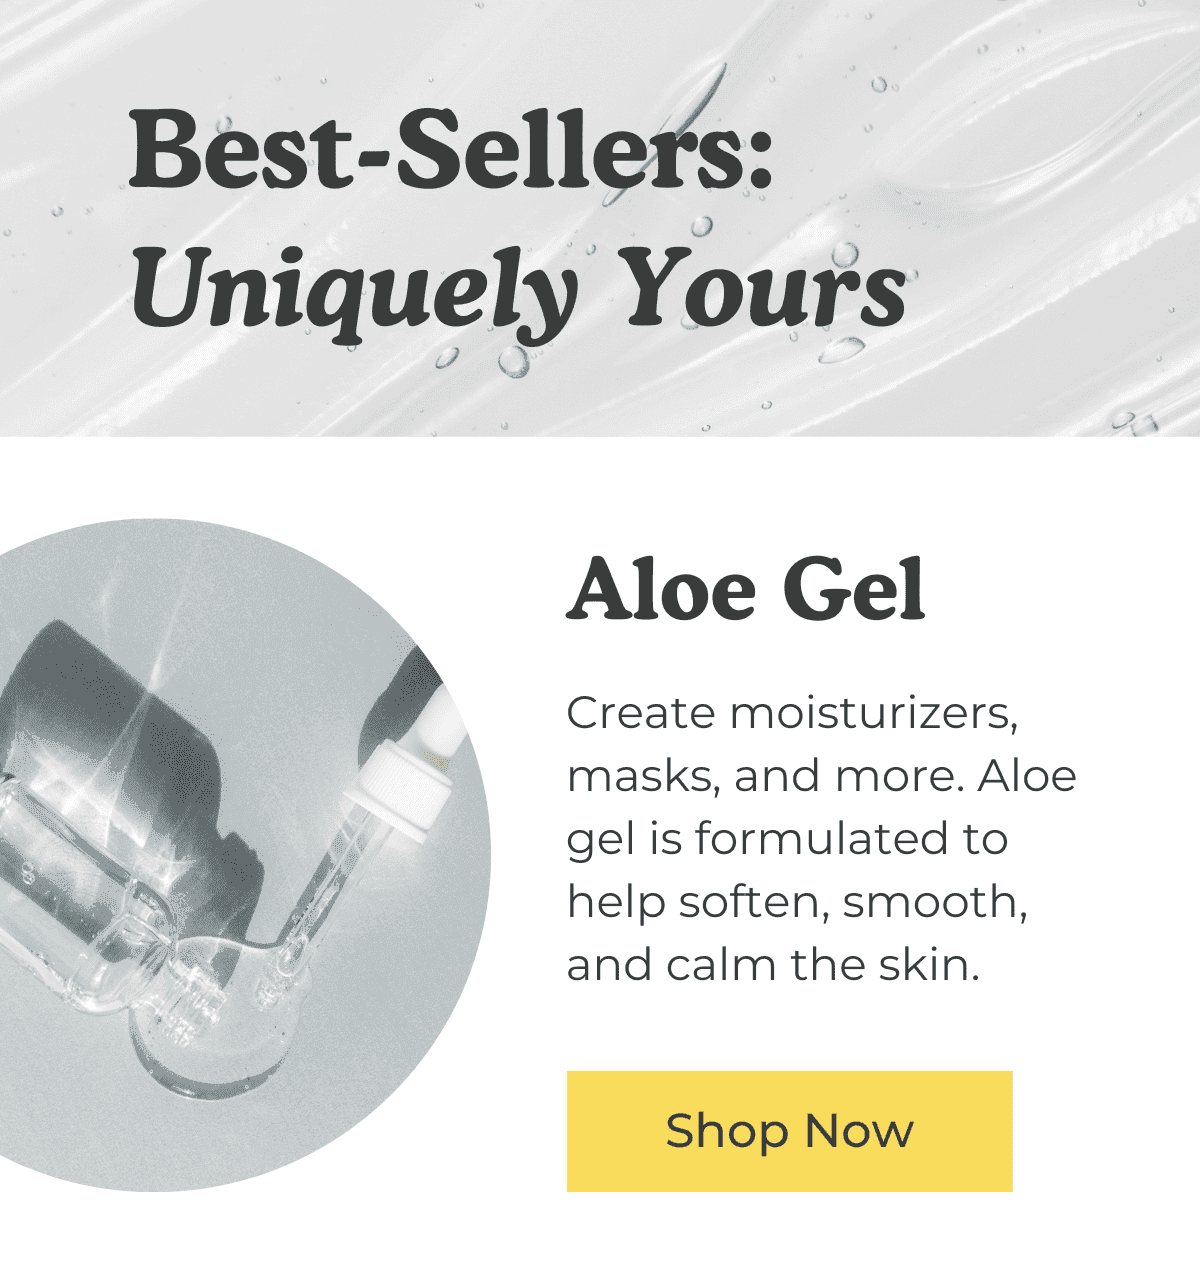 Best-Sellers: Uniquely Yours. Aloe Gel: Create moisturizers, masks, and more. Aloe gel is formulated to help soften, smooth, and calm the skin. SHOP NOW